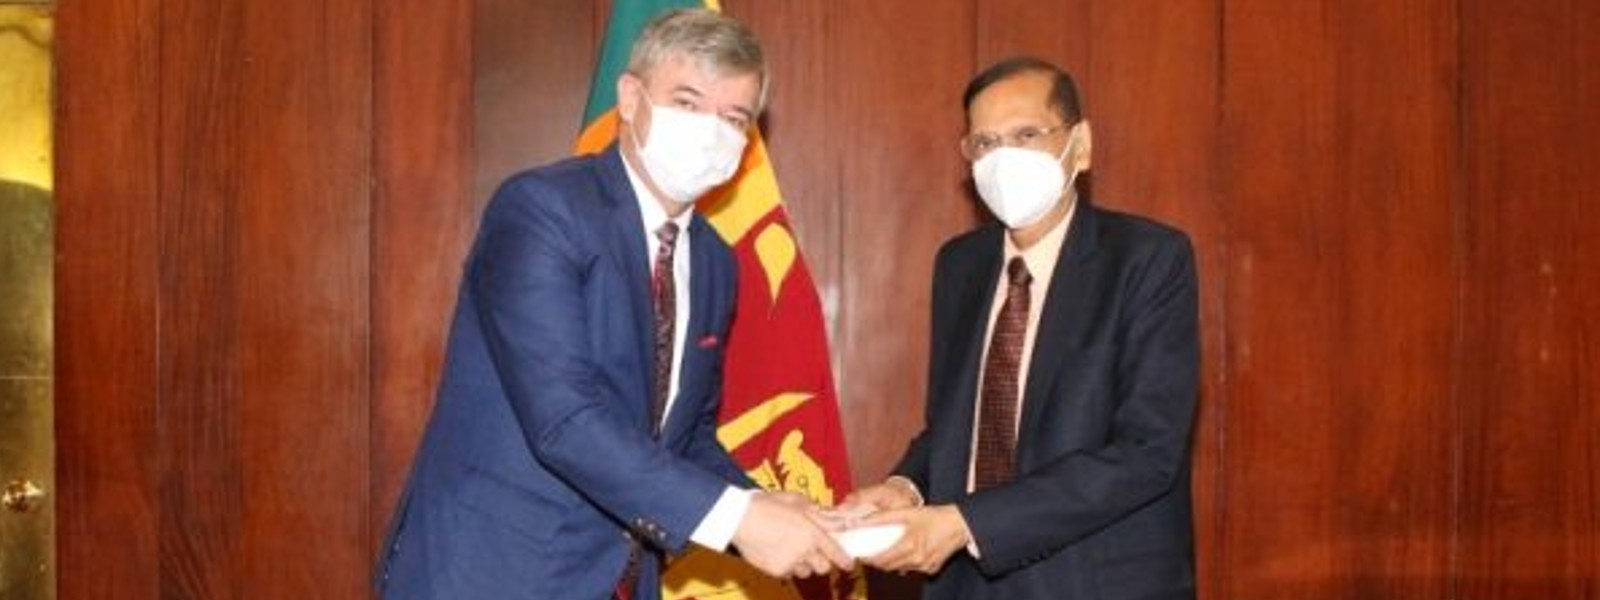 Czech Republic & SL enter into agreement of transfer of sentenced persons